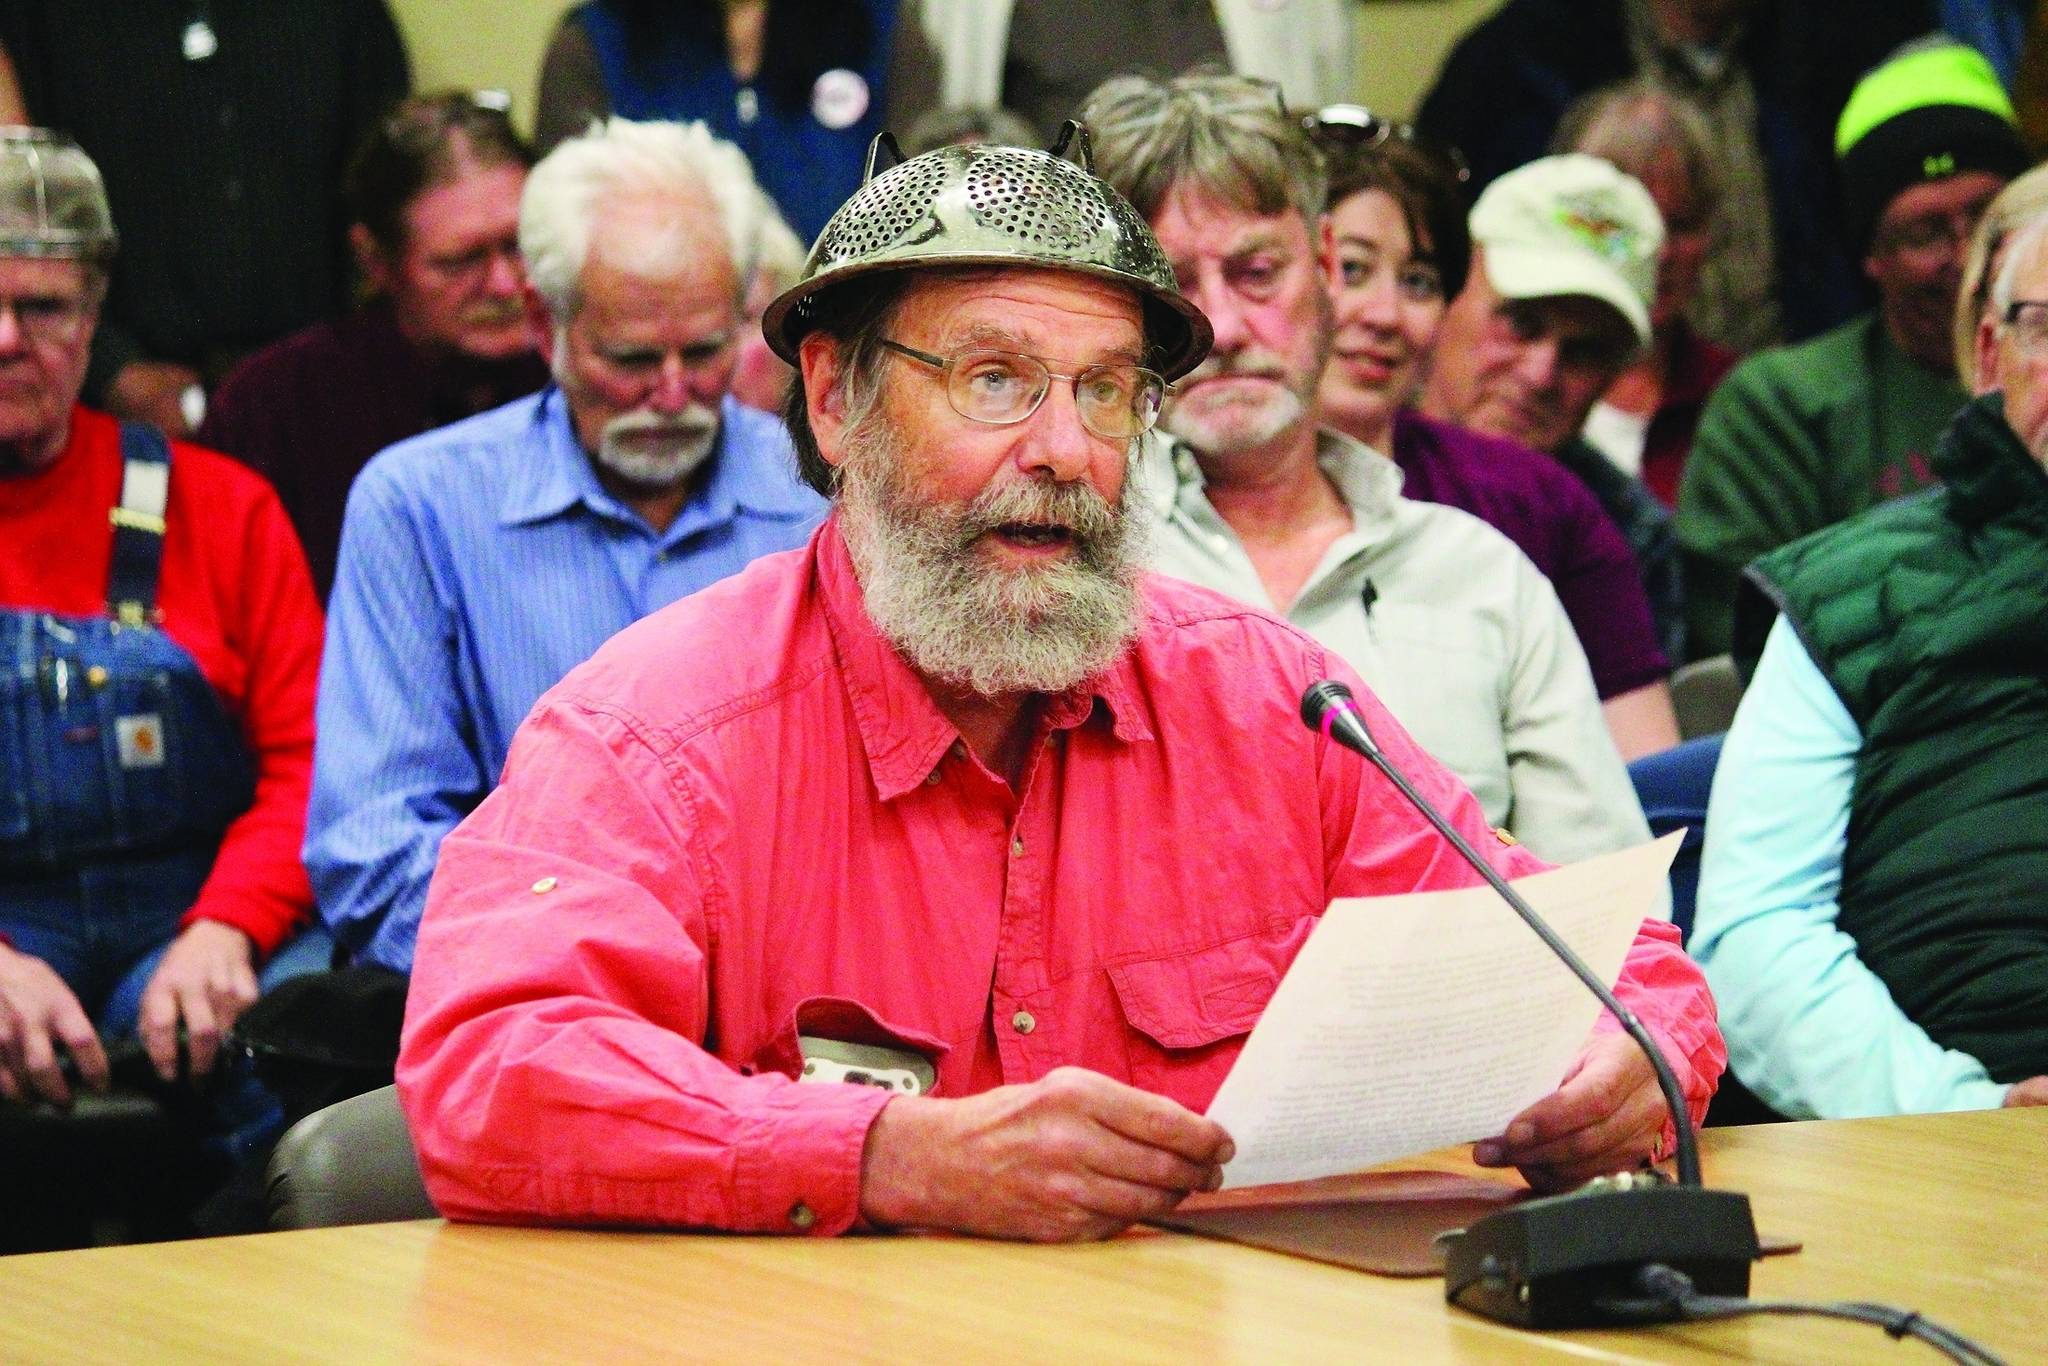 Fritz Creek area resident Barrett Fletcher gives the invocation before a Kenai Peninsula Borough Assembly meeting as a representative of the Church of the Flying Spaghetti Monster at Homer City Hall in Homer, Alaska, Tuesday, Sept. 18, 2019. A pastor wearing a spaghetti strainer on his head delivered the opening invocation at the Kenai Peninsula Borough Assembly meeting Tuesday. The invocation by the pastor of the Homer congregation of the Church of the Flying Spaghetti Monster is the second non-traditional invocation before the assembly since a court ruling. (Megan Pacer/Homer News via AP)